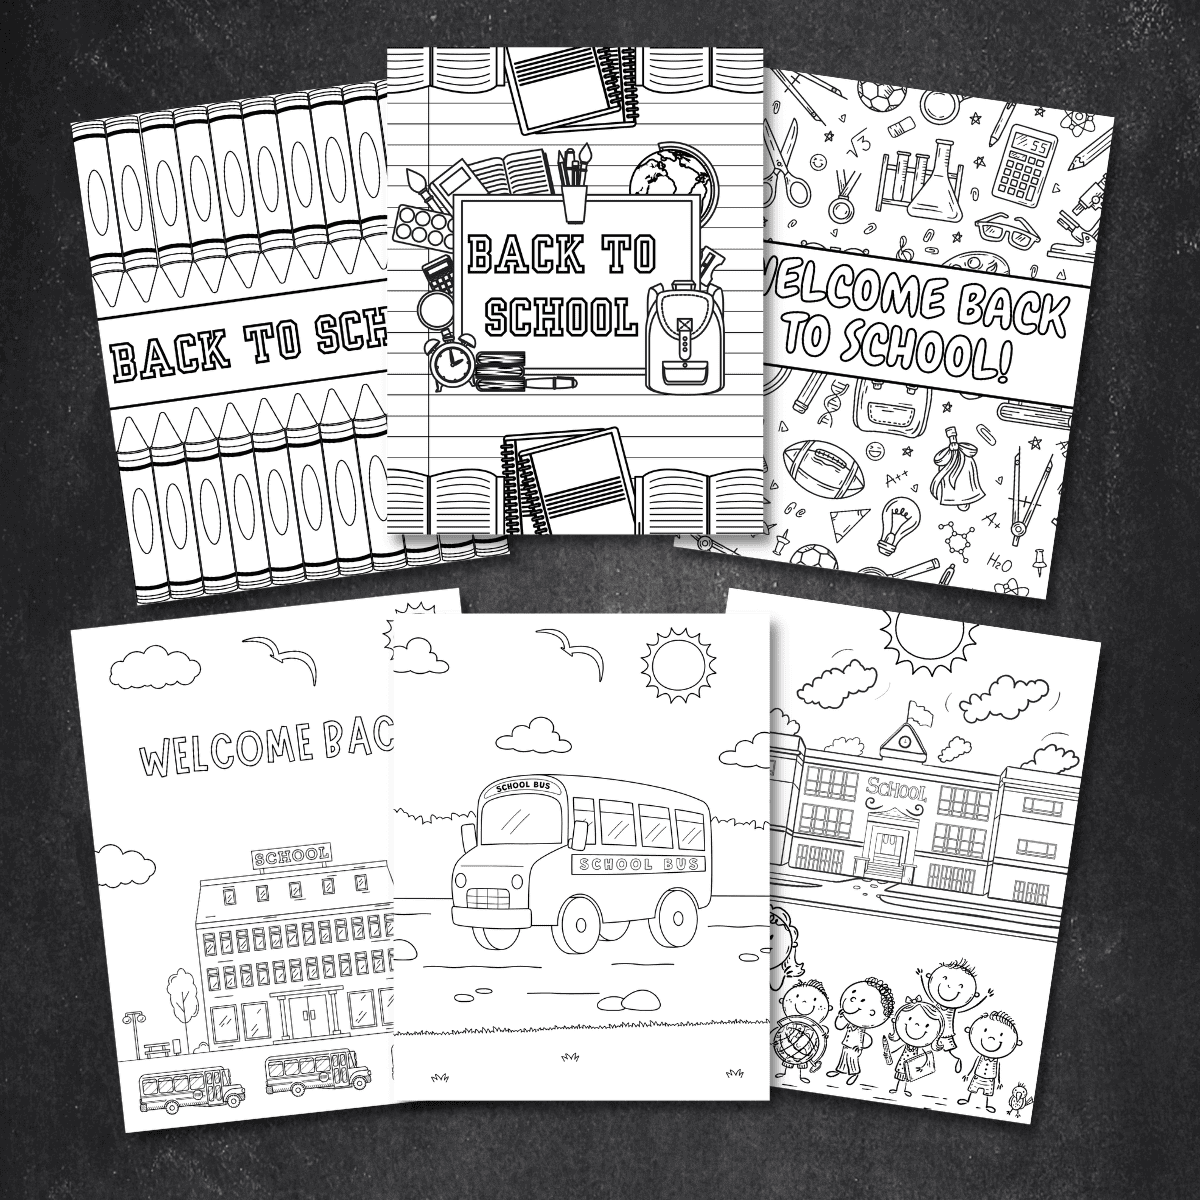 Printable Binder Covers to Color: Free Download for Back-to-School